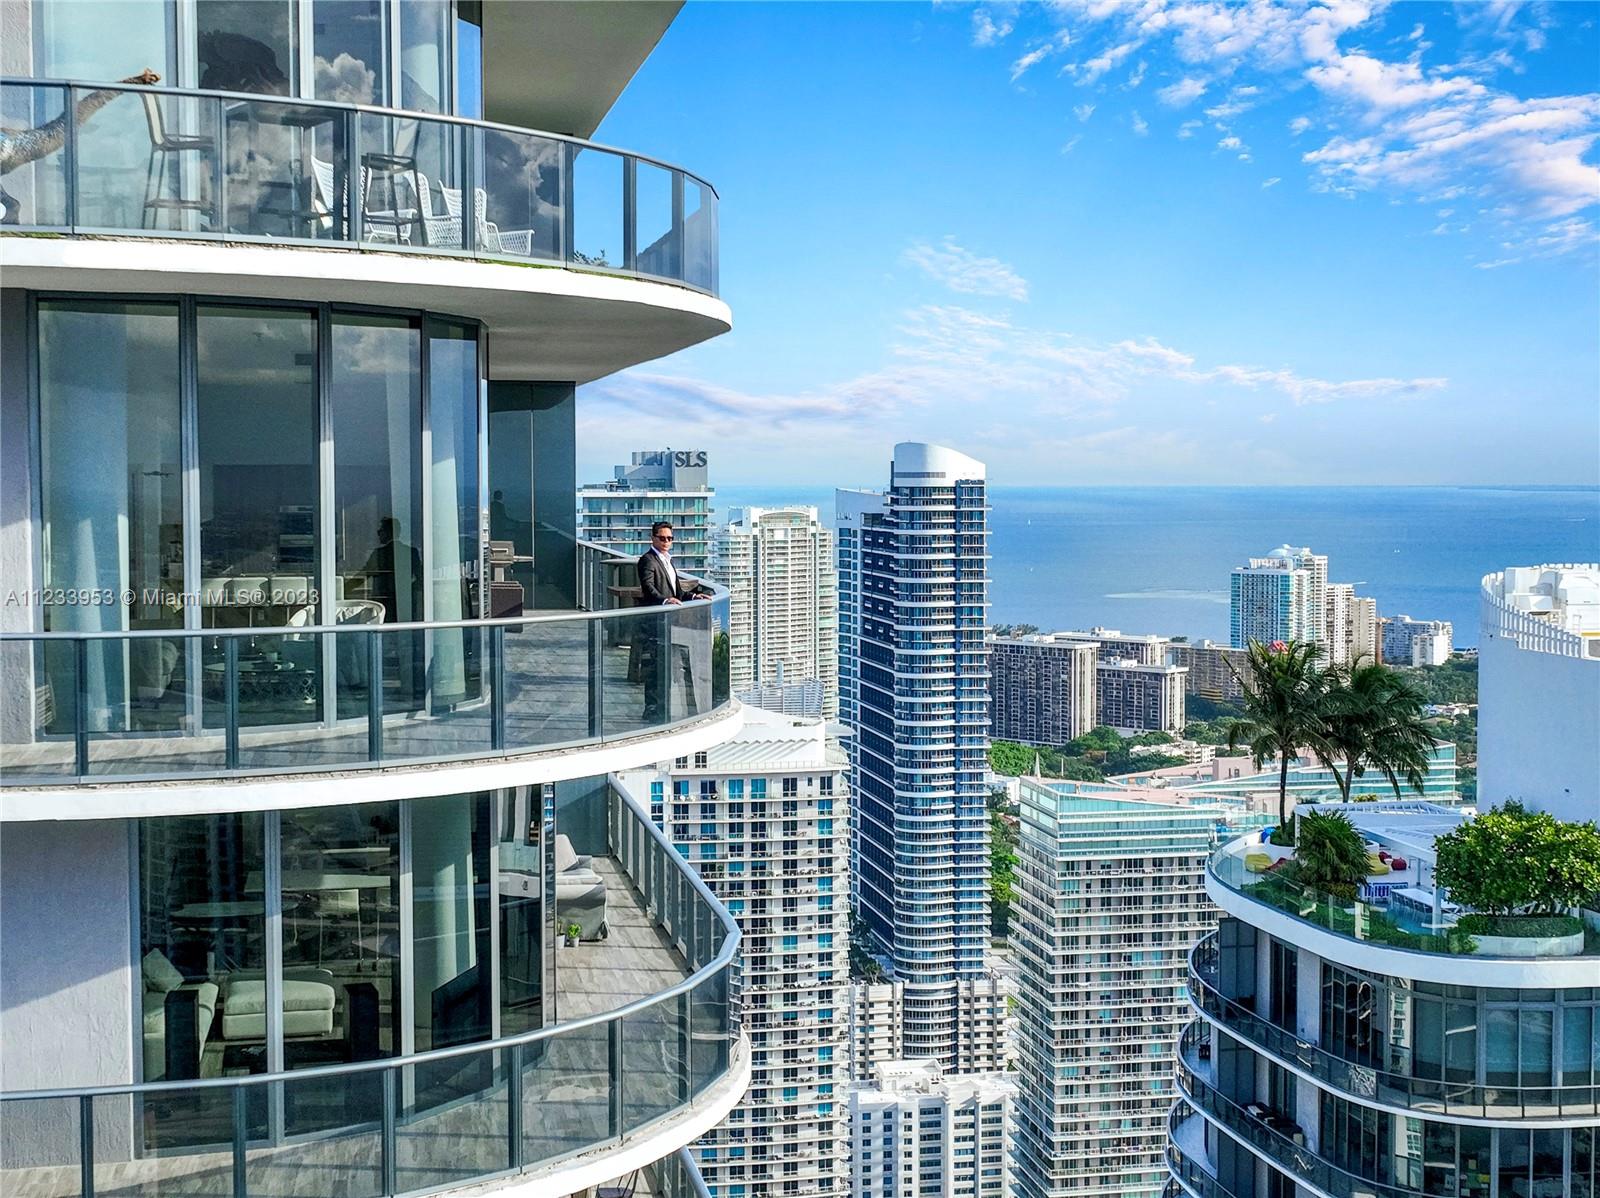 Penthouse Residence in the Epicenter of Brickell! SLS LUX is just steps away from Brickell City Centre, Miami's newest and most Extravagant Restaurants, Shopping, and Lifestyle destination. Enjoy a Stunning Panoramic view of 180 degrees from the Ocean, Miami River, and Downtown Skyline to Miami Beach. This unit offers a total of 2,490 sq feet indoors and outdoors, Smart Lightning, Wolf Appliances, Wine Cabinet, Nest Thermostats, and 2 Parking Spaces, Maintenance includes basic Cable & Internet. SLS LUX offers Hotel-style Amenities, 24/7 Concierge & Valet, Tennis court, Fitness Center, Billiard Room, Infinity Pool with Cabanas, Ciel Spa and Salon by Miller, Altitud Pool, Weekly Events, and More! Reserve your Private Tour Today!